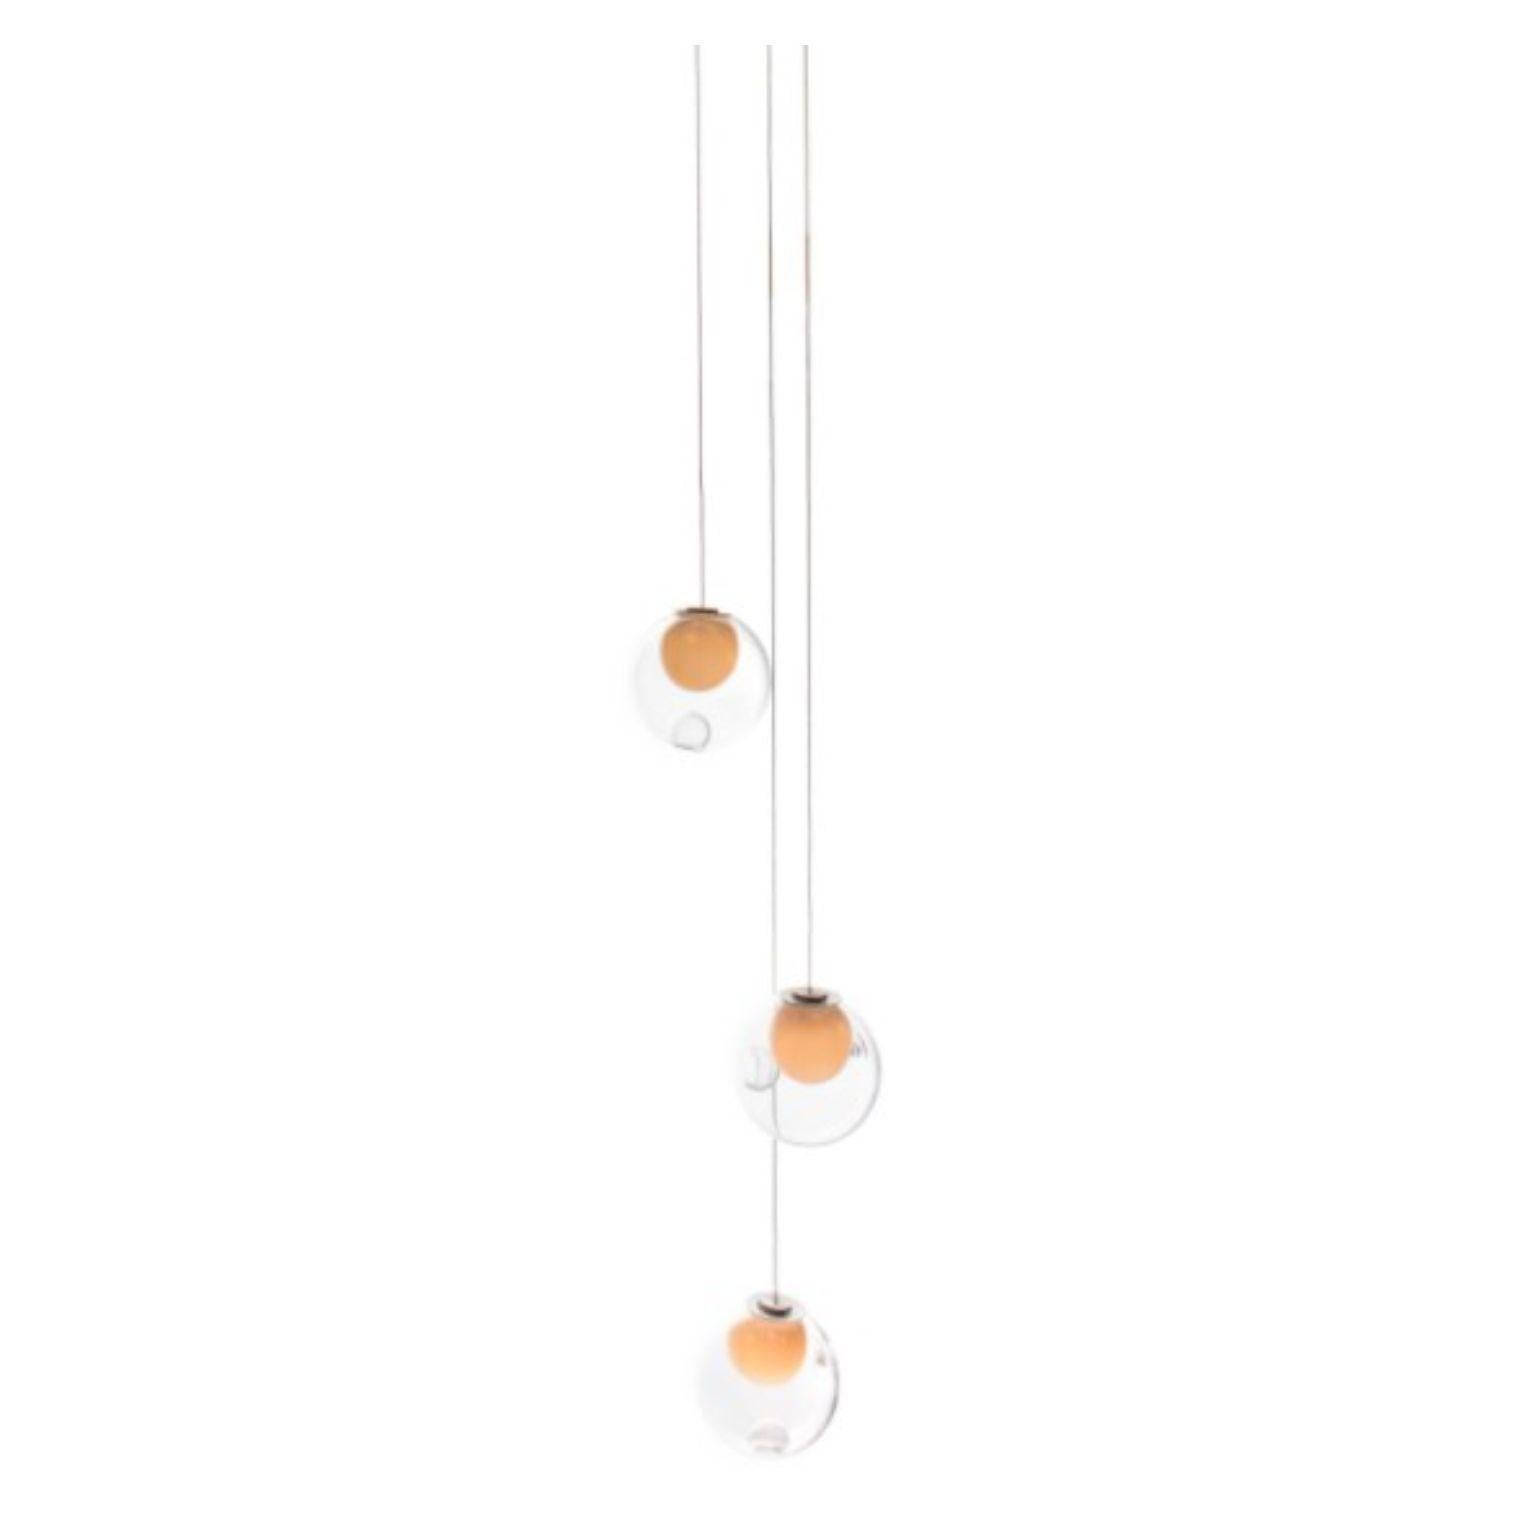 28.1 Pendant by Bocci
Dimensions: D15.2 x H300 cm
Materials: diameter brushed nickel canopy
Weight: 3.5 kg
Also available in different dimensions.

All our lamps can be wired according to each country. If sold to the USA it will be wired for